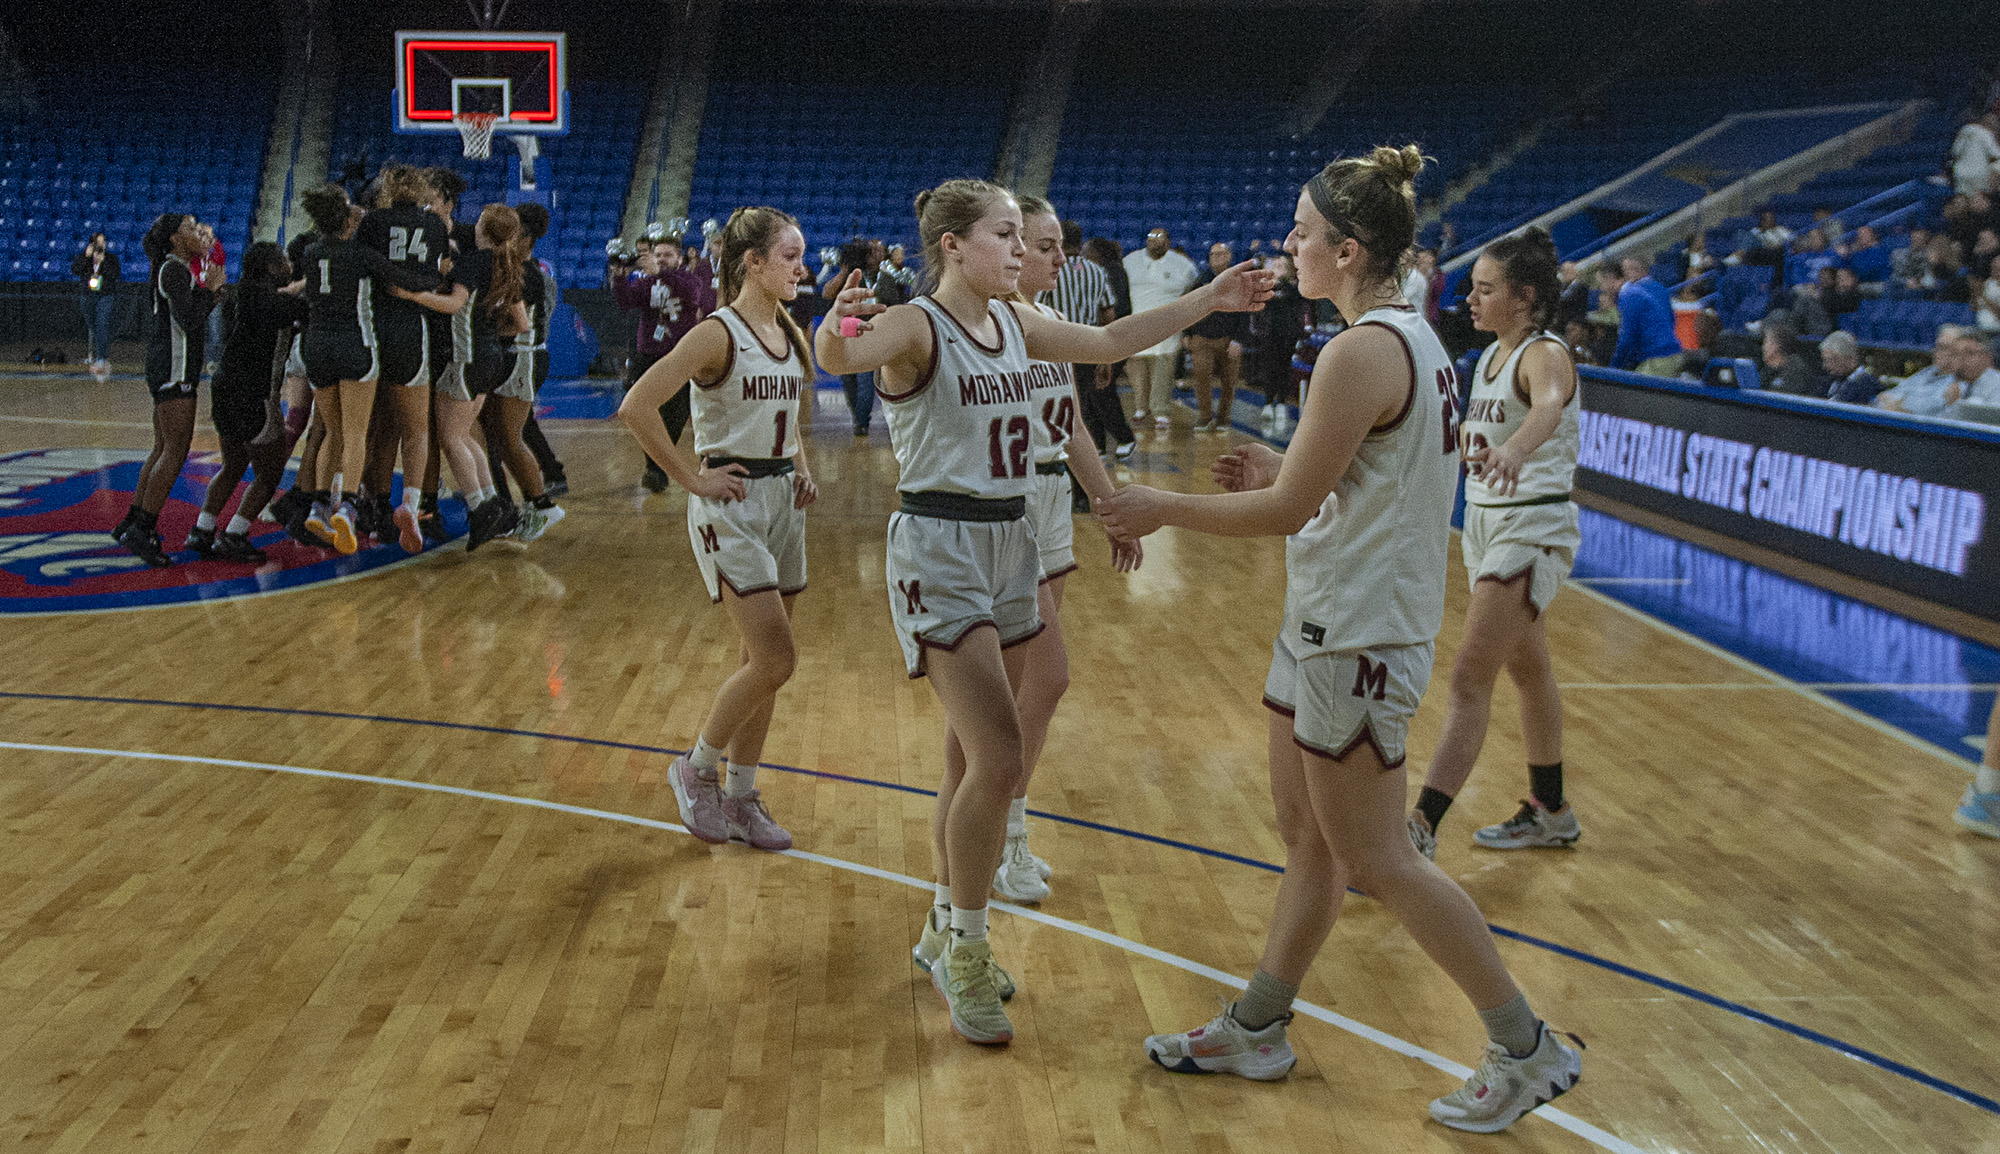 The Millis High School girls basketball team, from left, Lindsey Grattan, Kyra Rice, Izzy Jewett, captain Mia Molinari, and captain Lily Avakian, react after losing to Springfield International Charter School, 42-34,  in the 2023 Div. 5 state finals at the Tsongas Center in Lowell, March 19, 2023. 